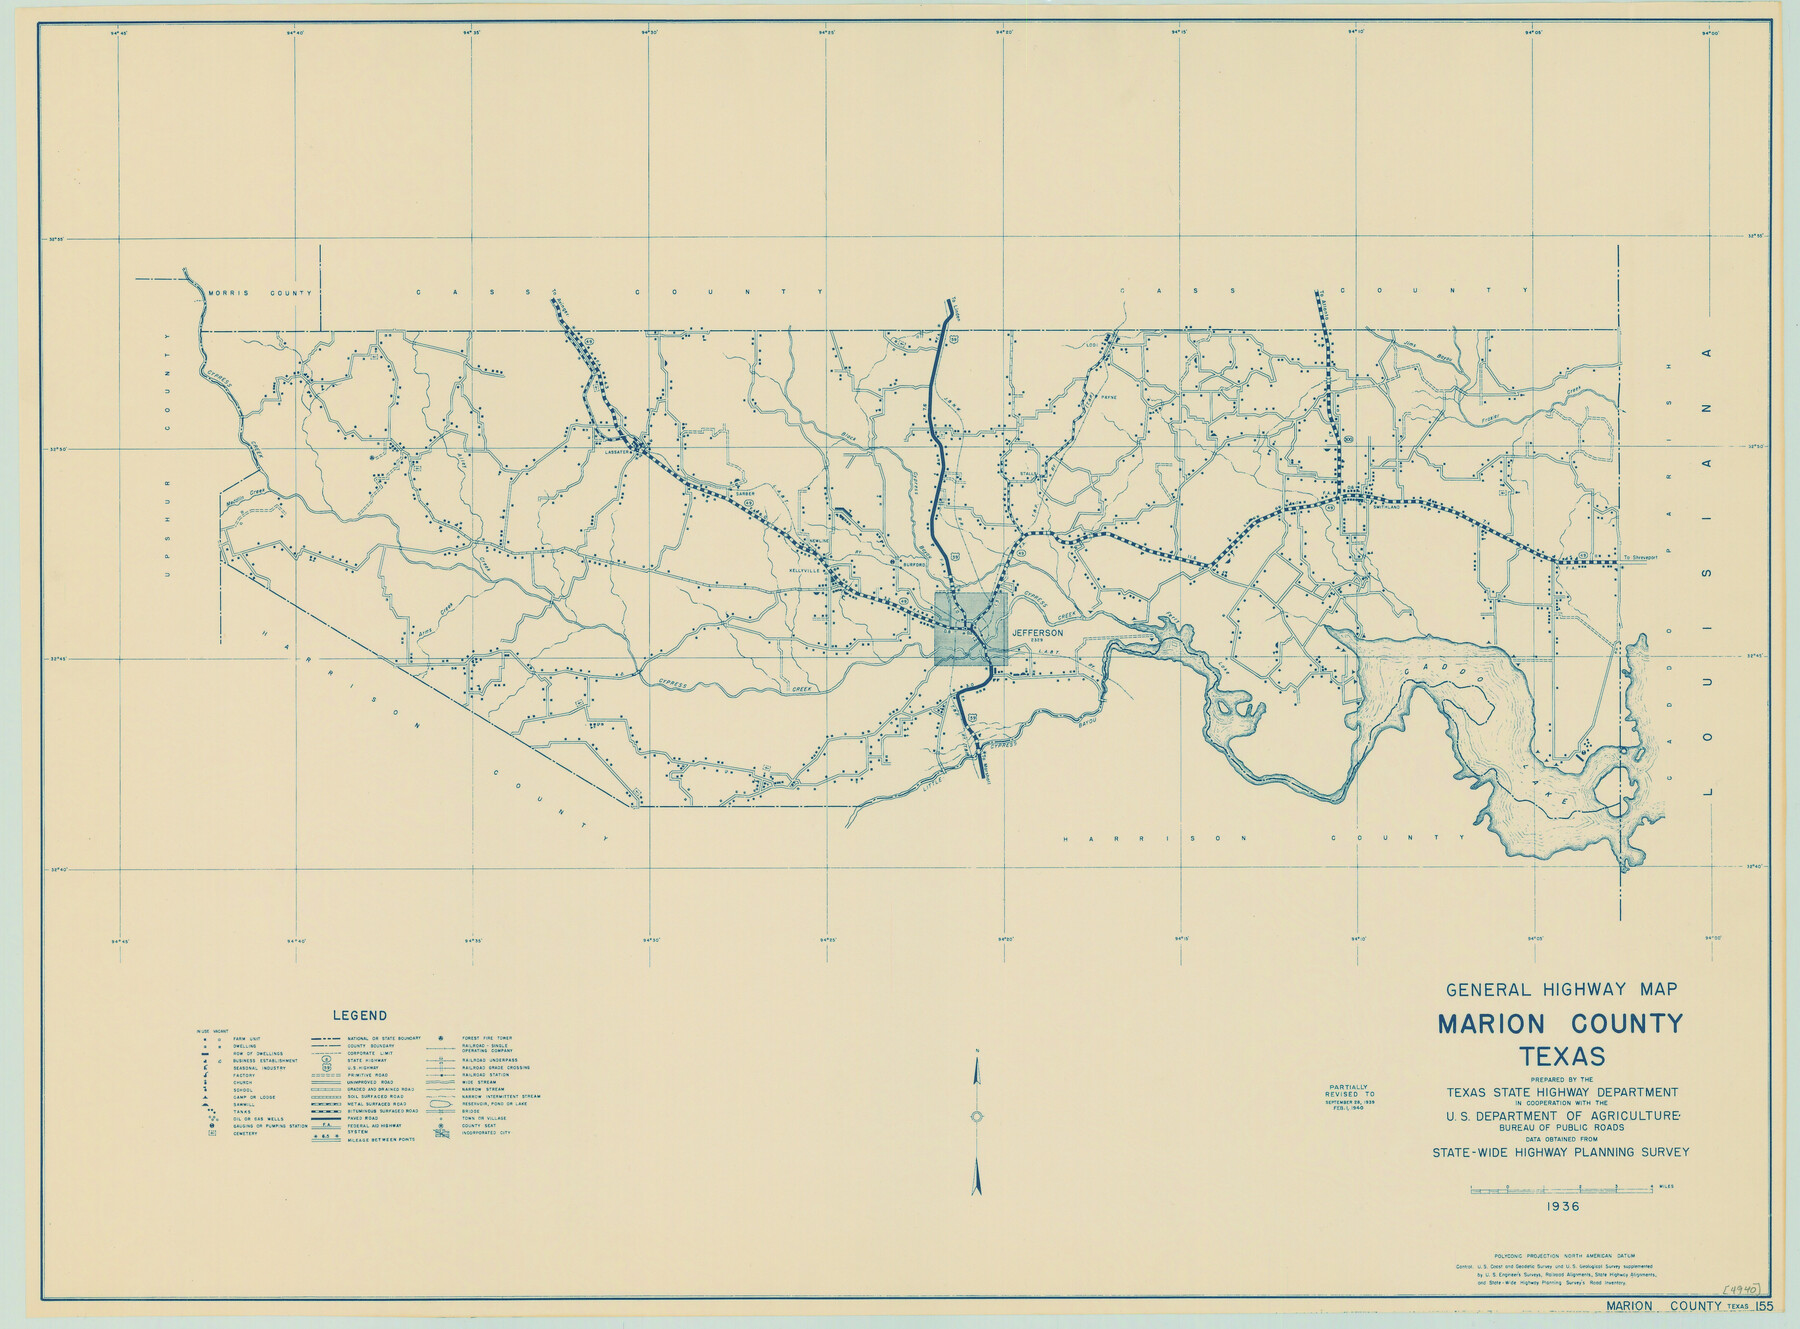 79184, General Highway Map, Marion County, Texas, Texas State Library and Archives